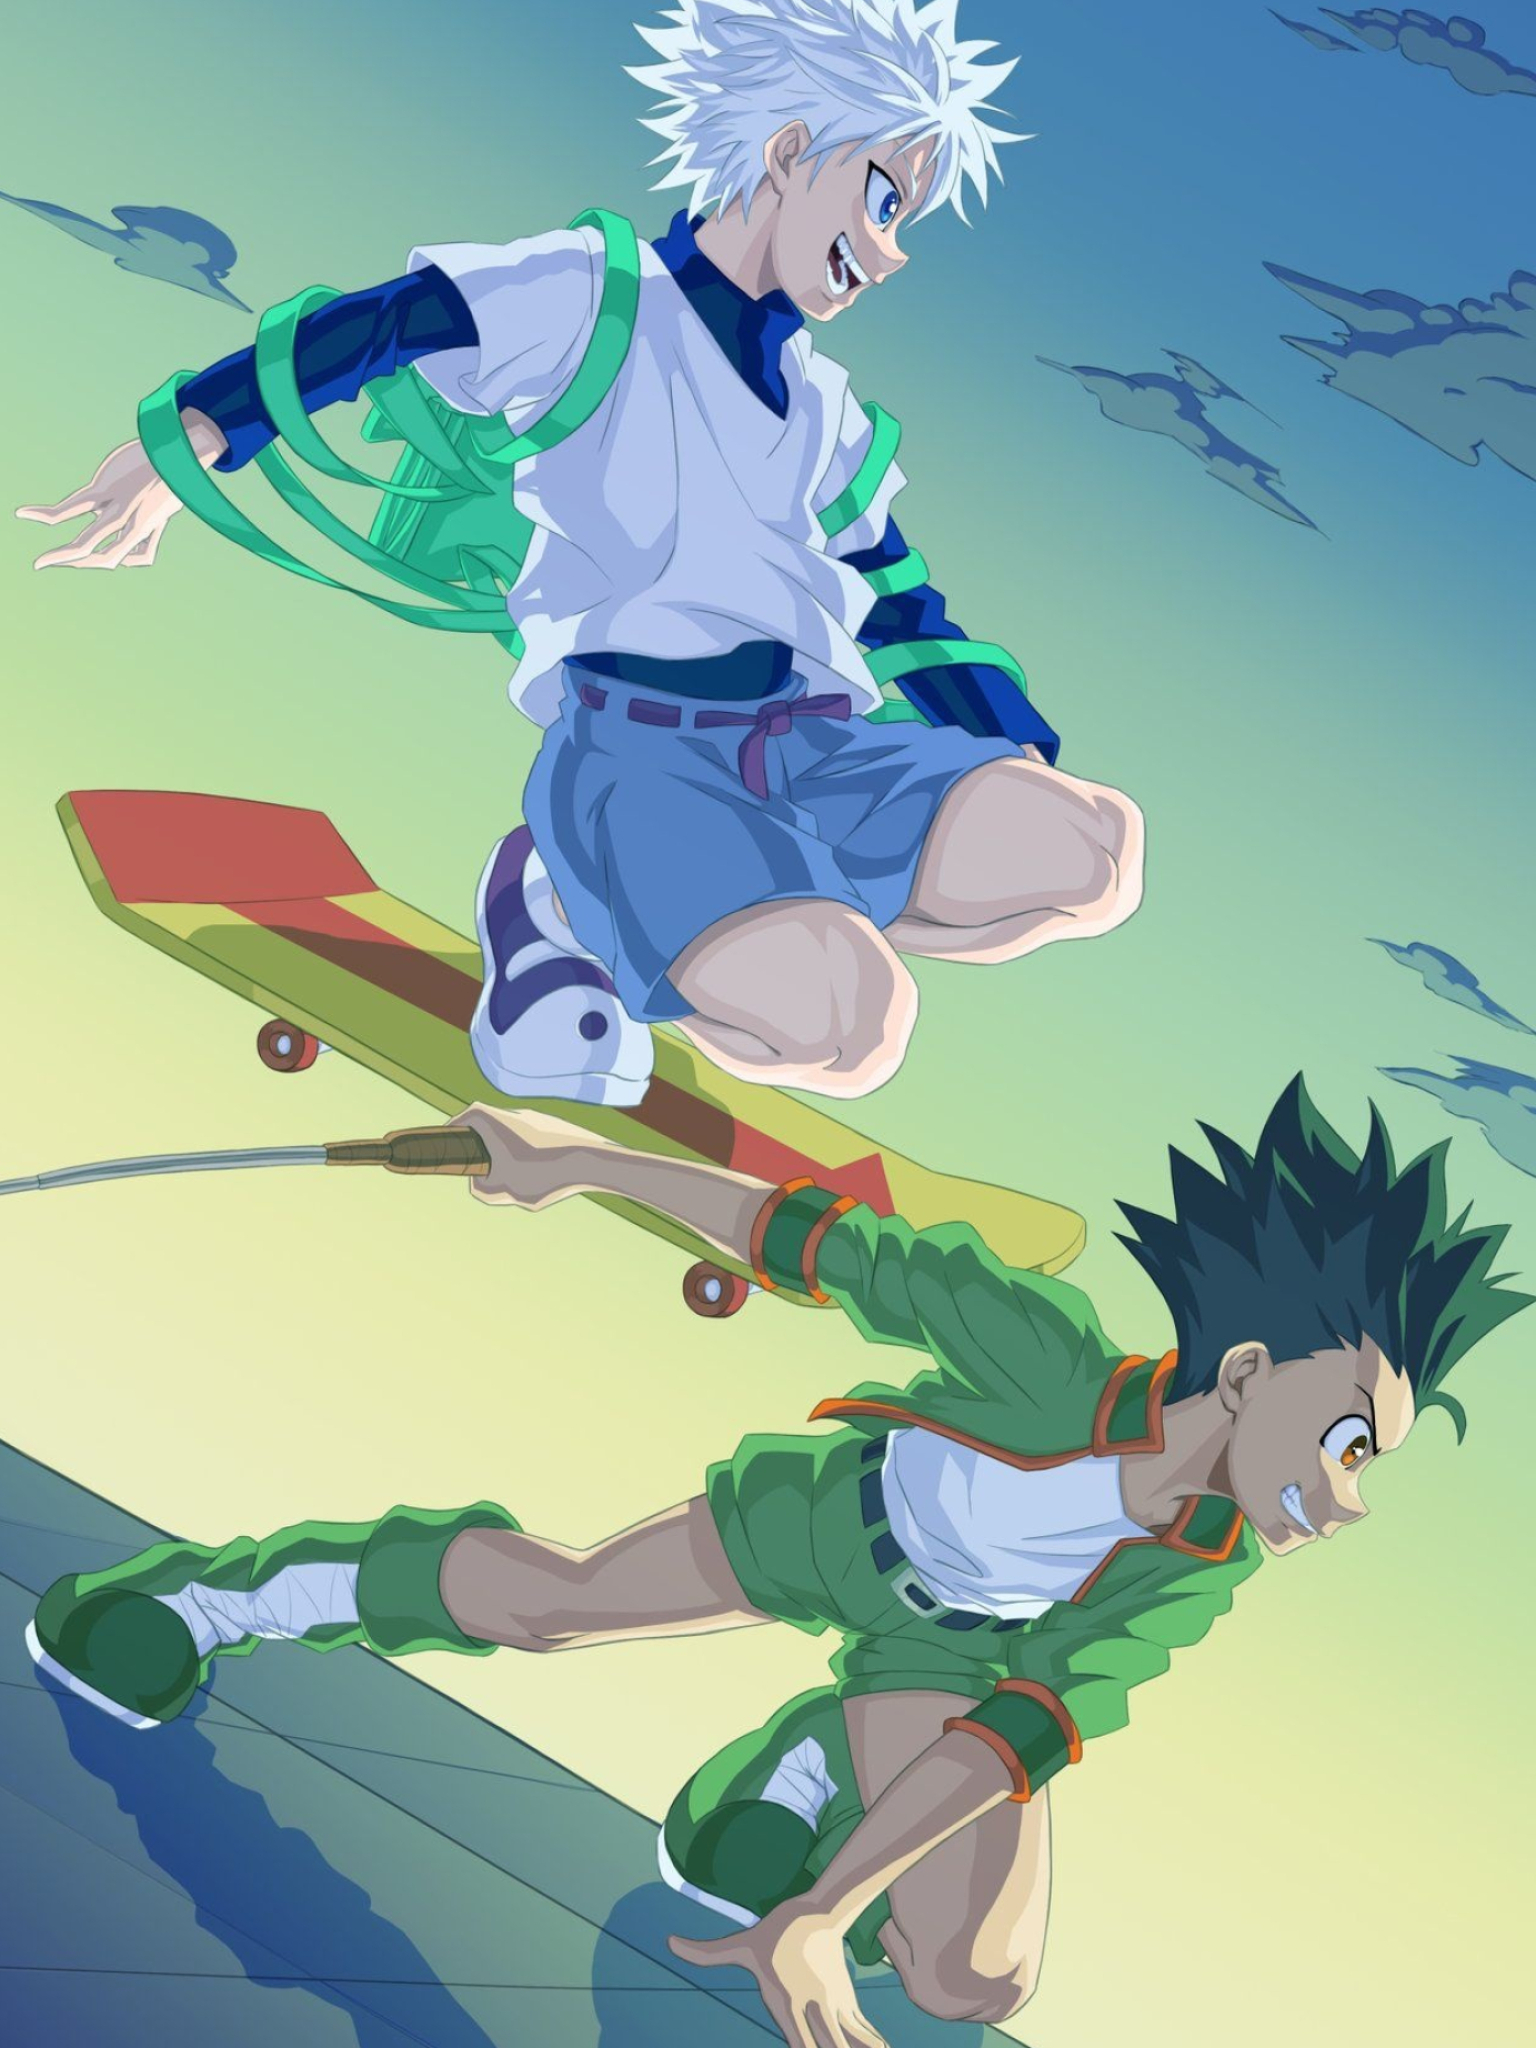 Gon Freecss: H x H series, Gon's friend Killua, A boy with spiky silver hair, Animation. 1540x2050 HD Background.